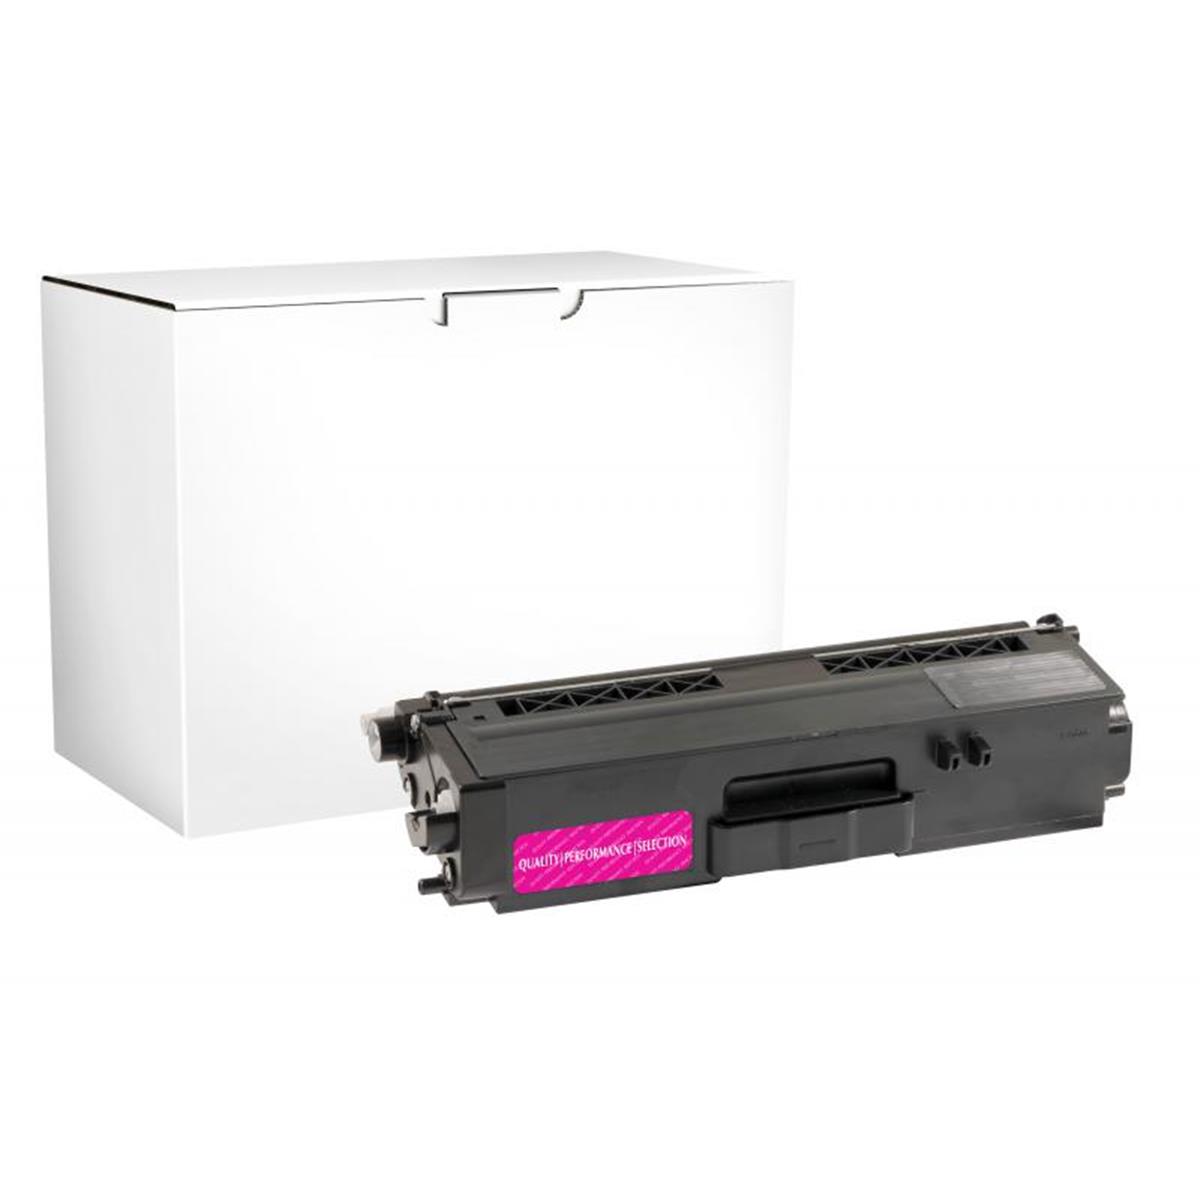 Picture of Brother 200912 High Yield Magenta Toner Cartridge for TN336